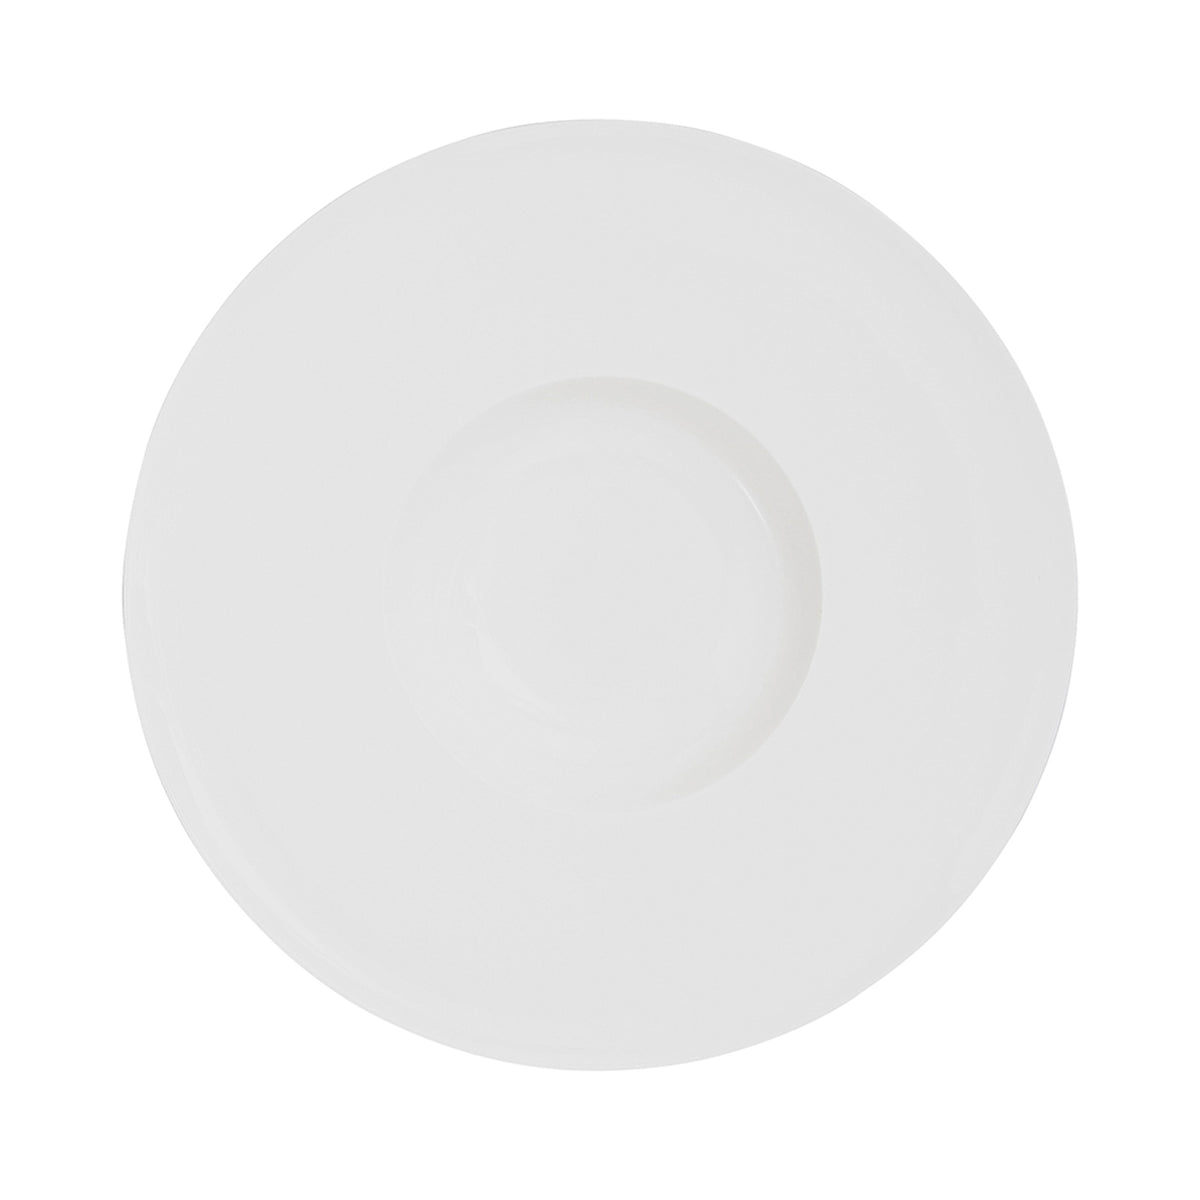 A Table Gourmet Plate